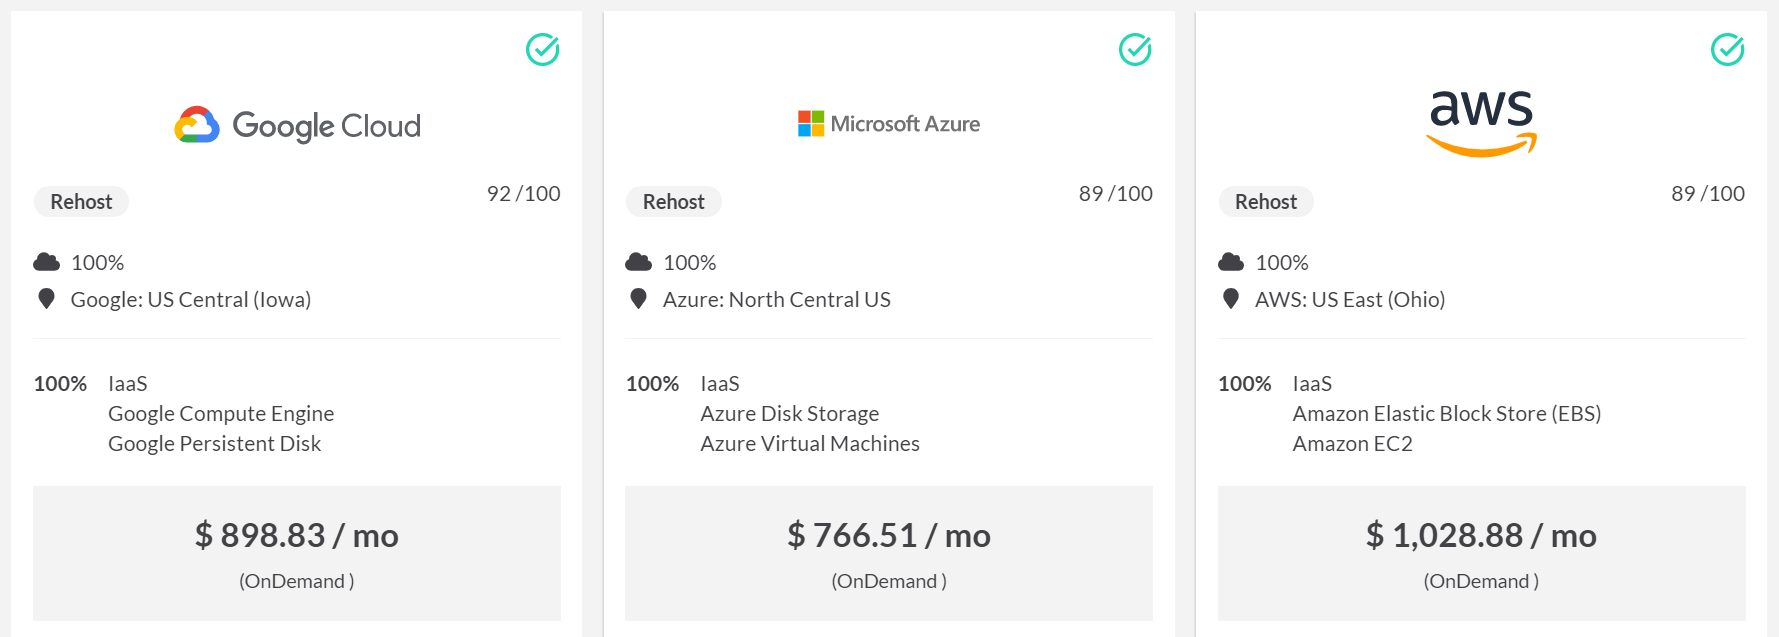 Figure 3. Actual costs of the application “Helios BI” at AWS, as well as cost comparison of the assessed application as IaaS at GCP and MS Azure.